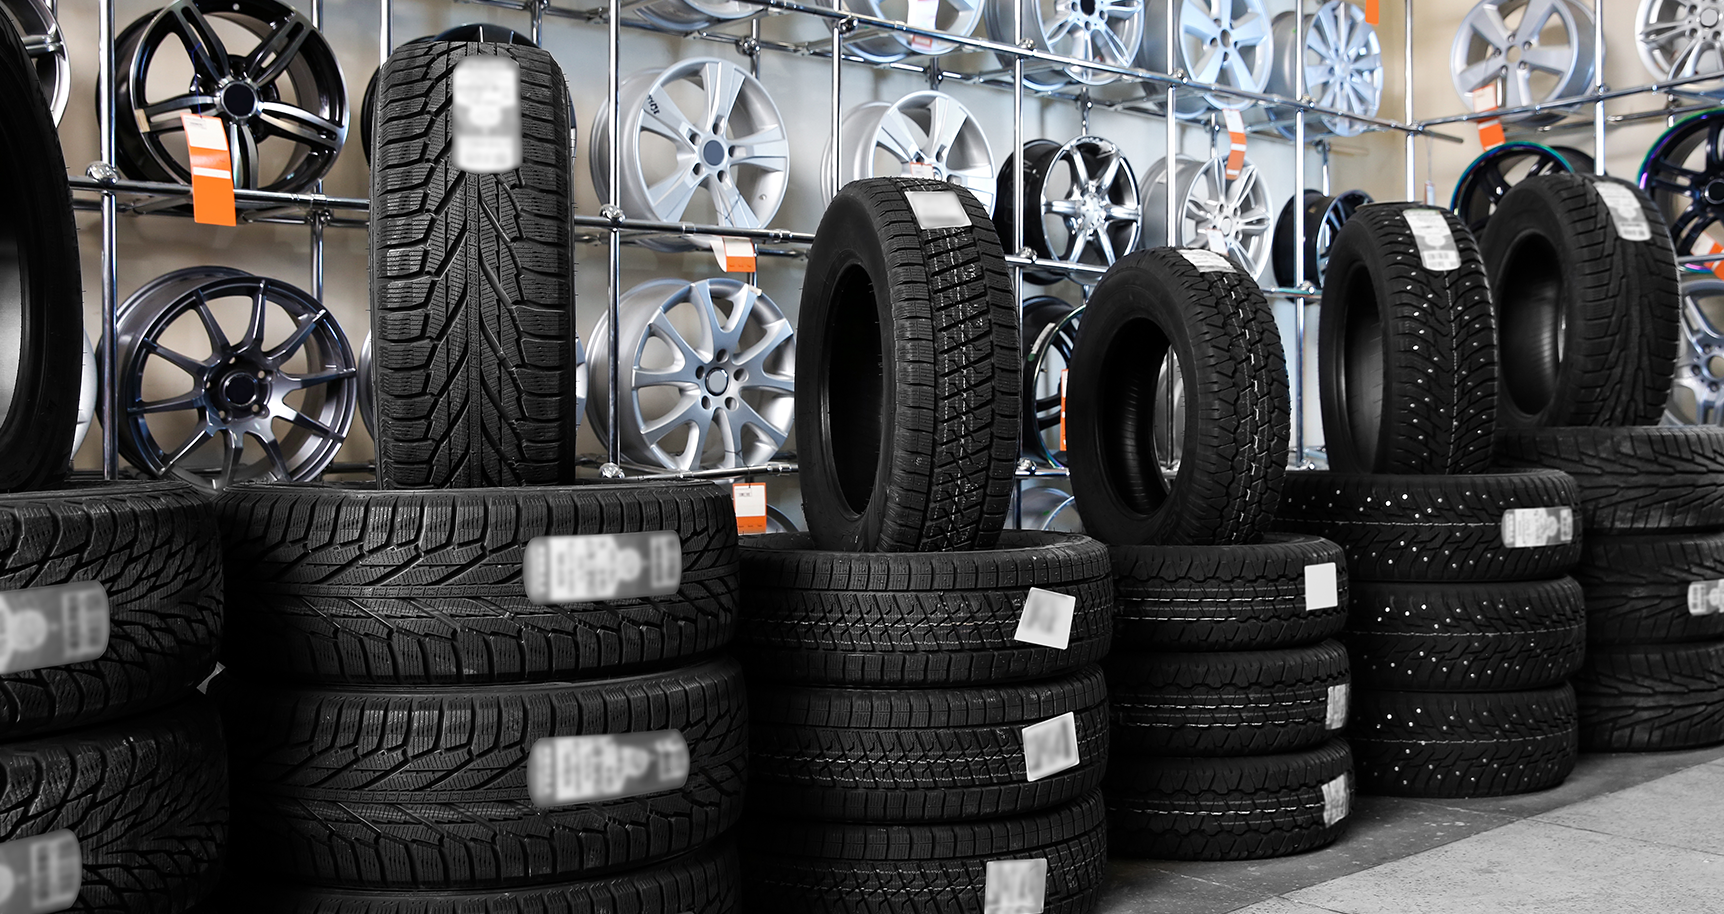 How to buy tires on a budget